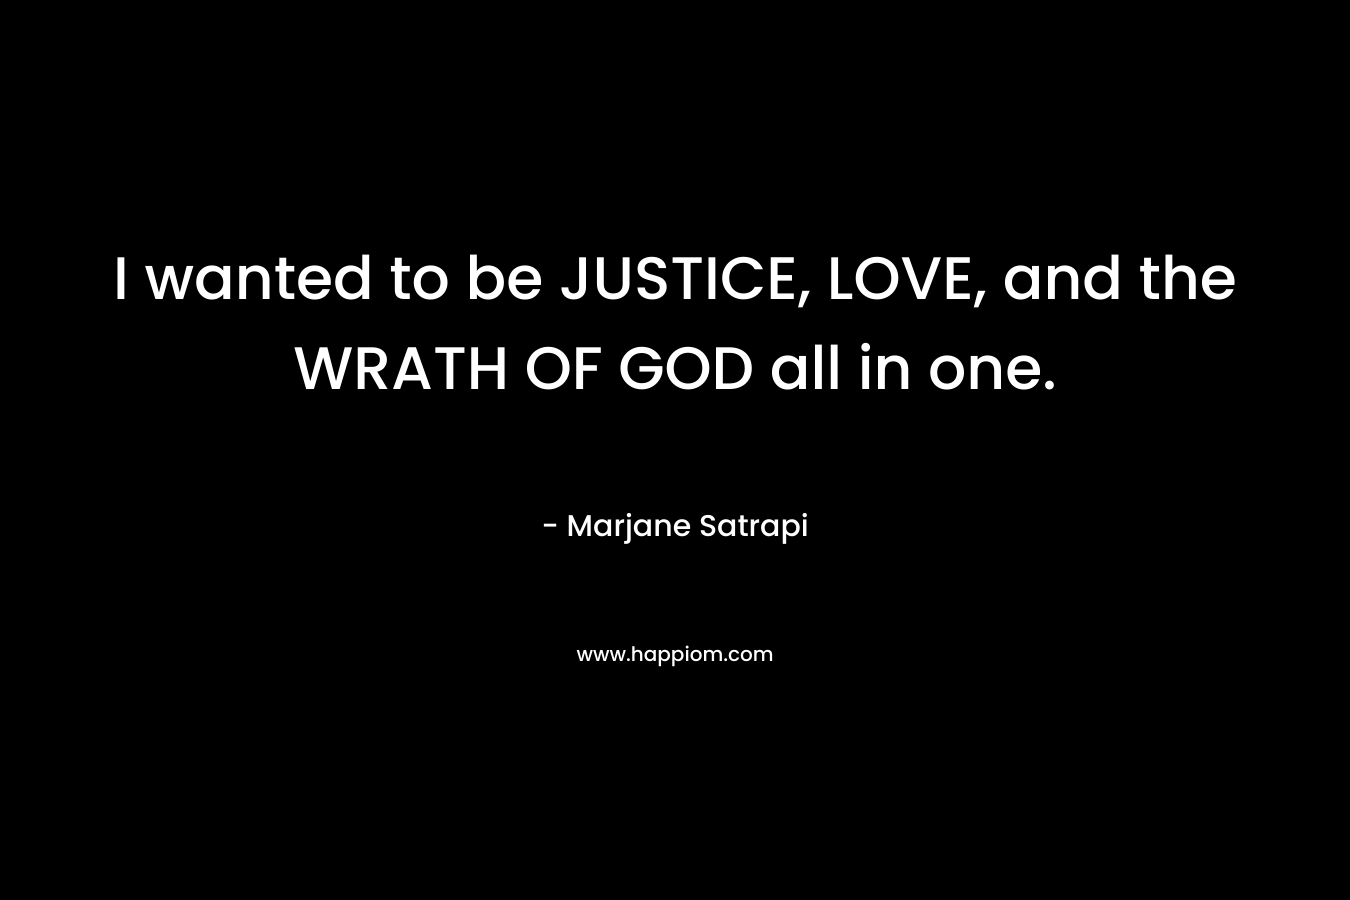 I wanted to be JUSTICE, LOVE, and the WRATH OF GOD all in one. – Marjane Satrapi